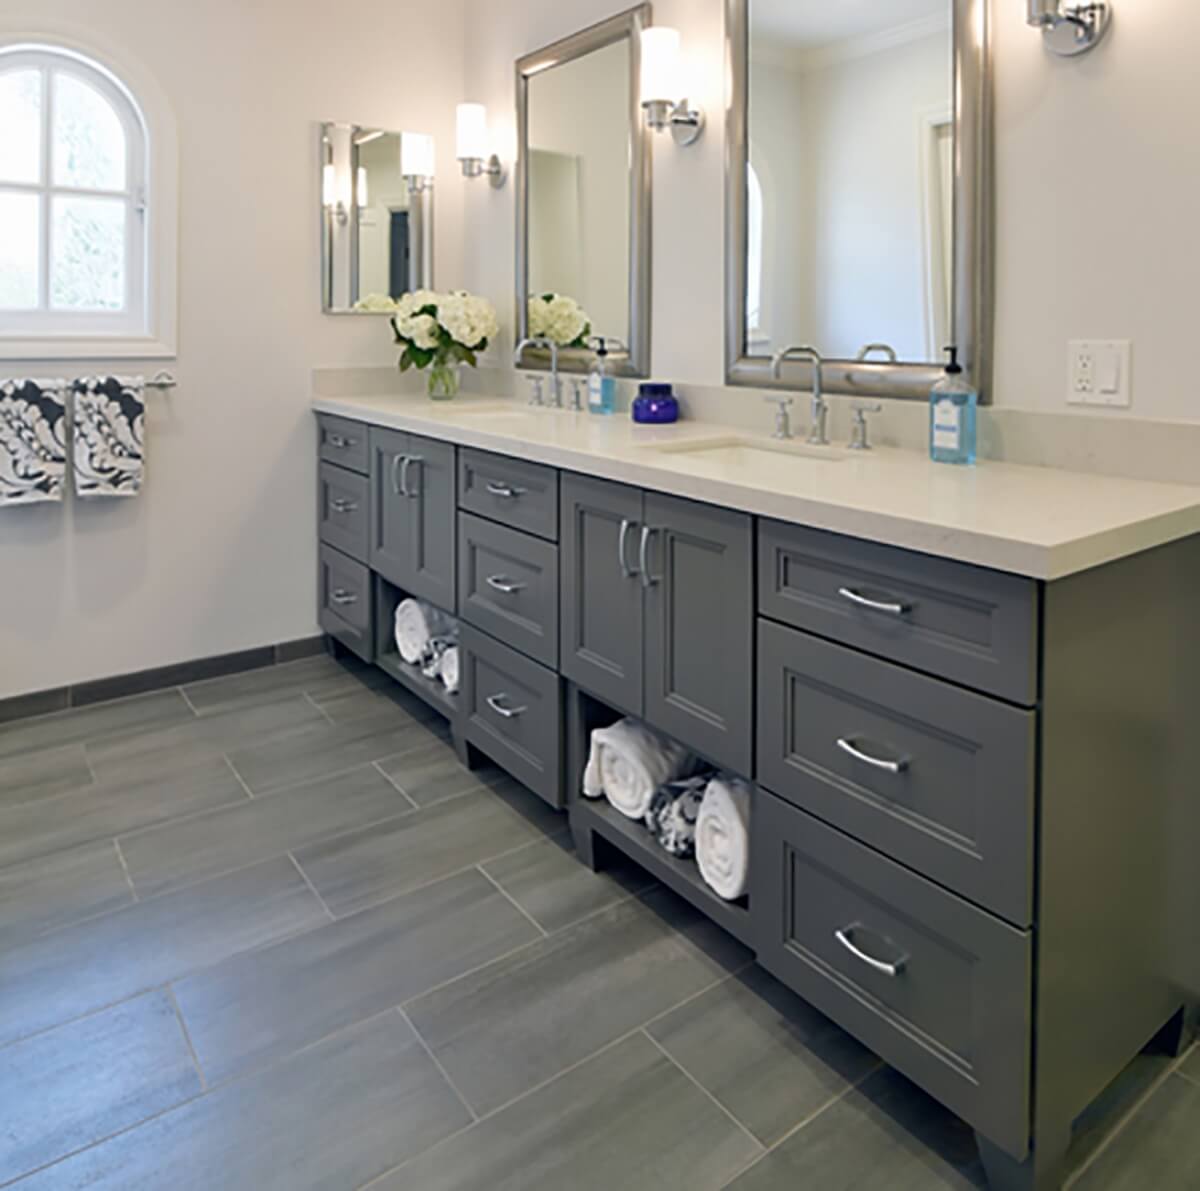 A master bathroom with a dark gray painted vanity with open storage for bath towels. Featuring a nickel finish on the cabinet hardware, plumbing fixtures, faucet, light fixtures, and bathroom mirrors frames. A lighter gray colored floor tile complements the dark gray vanity cabinets.